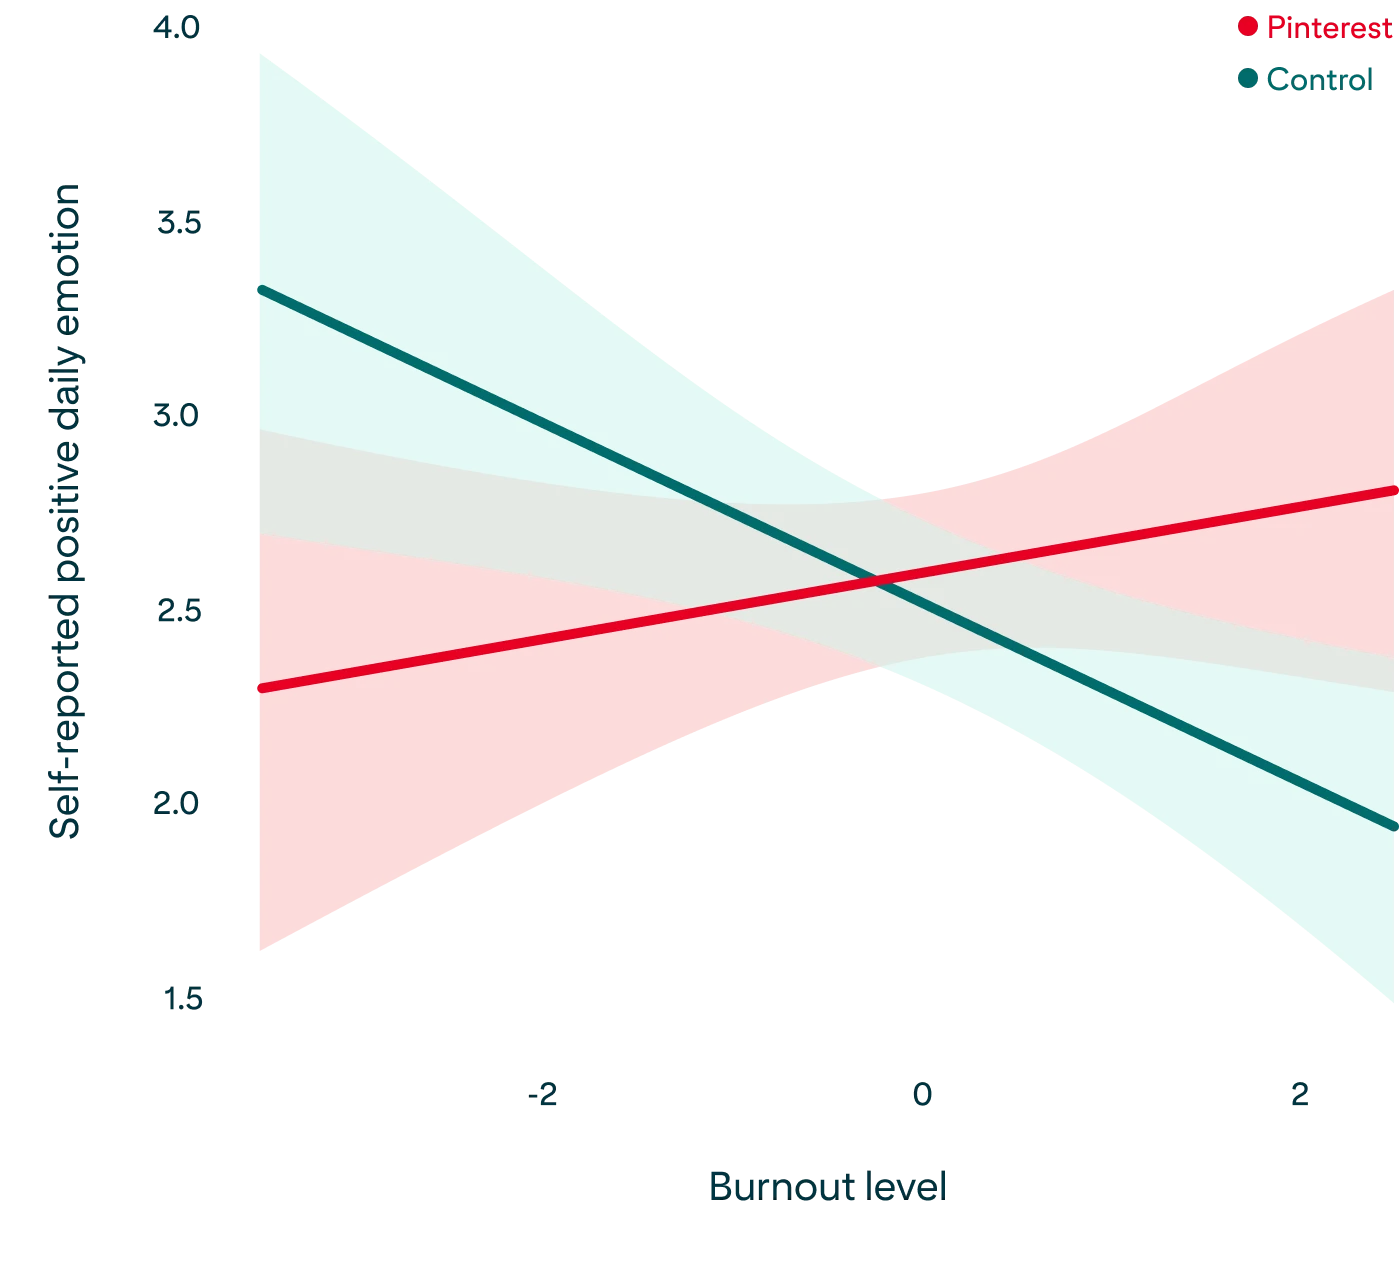  Chart showing the relationship between burnout levels and self-reported positive emotions, as described in the paragraph above 